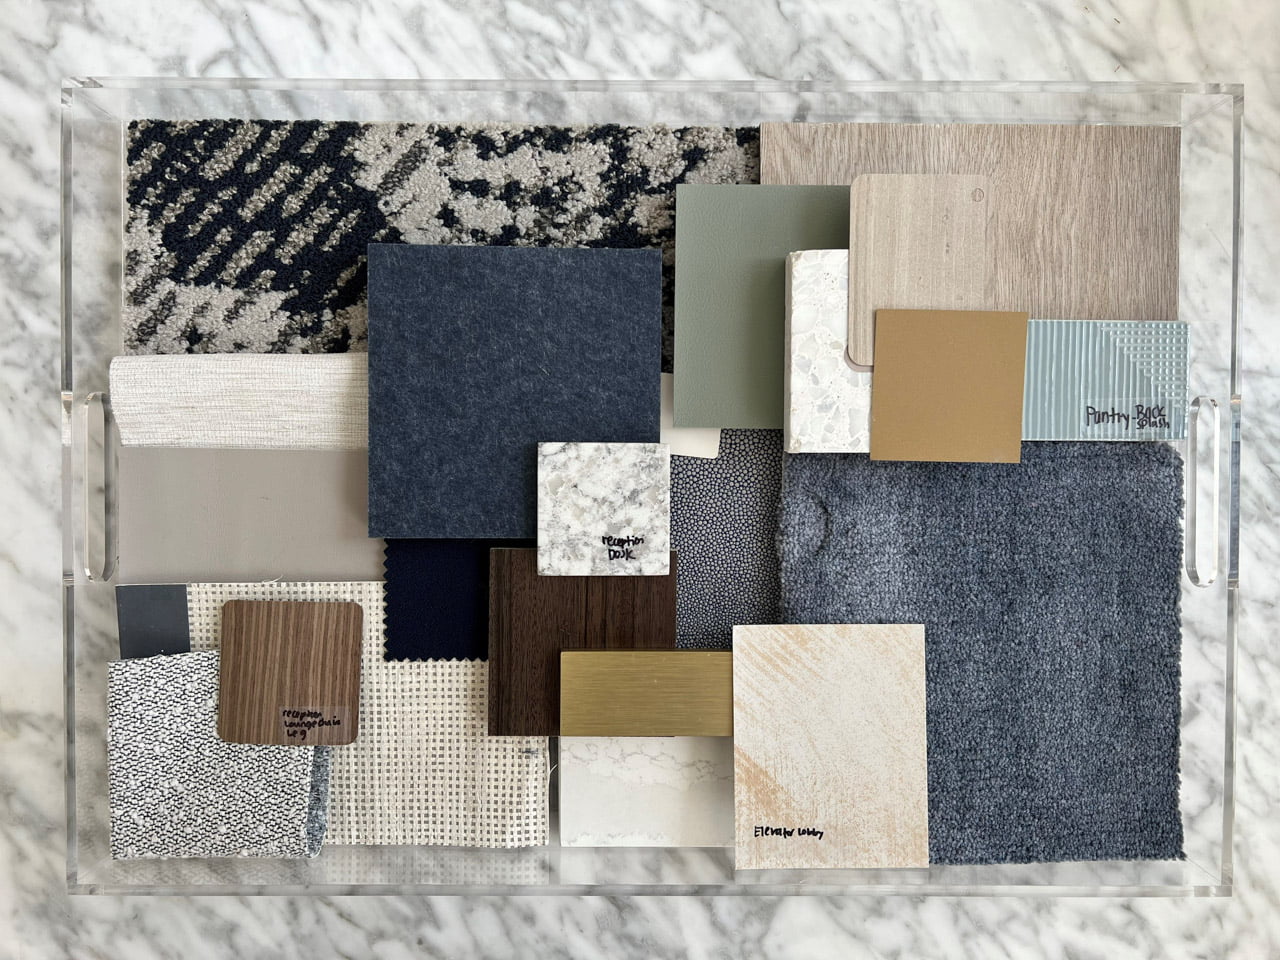 An assortment of materials ranging from textiles to tile